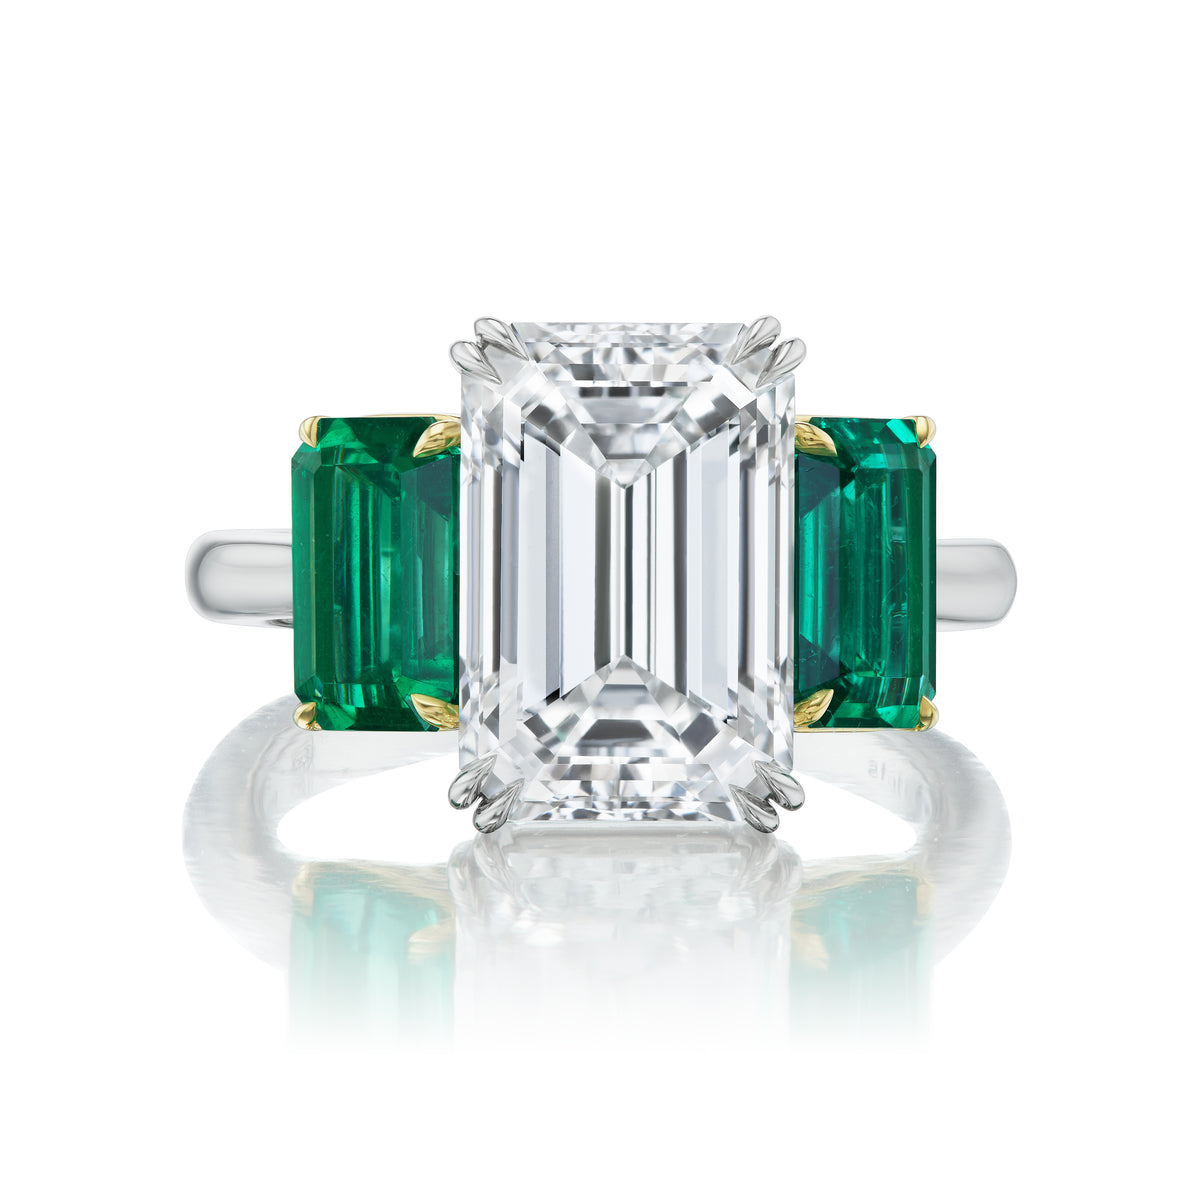 Emerald Cut Diamond Engagement Ring with Emerald Cut Emerald Side Stones